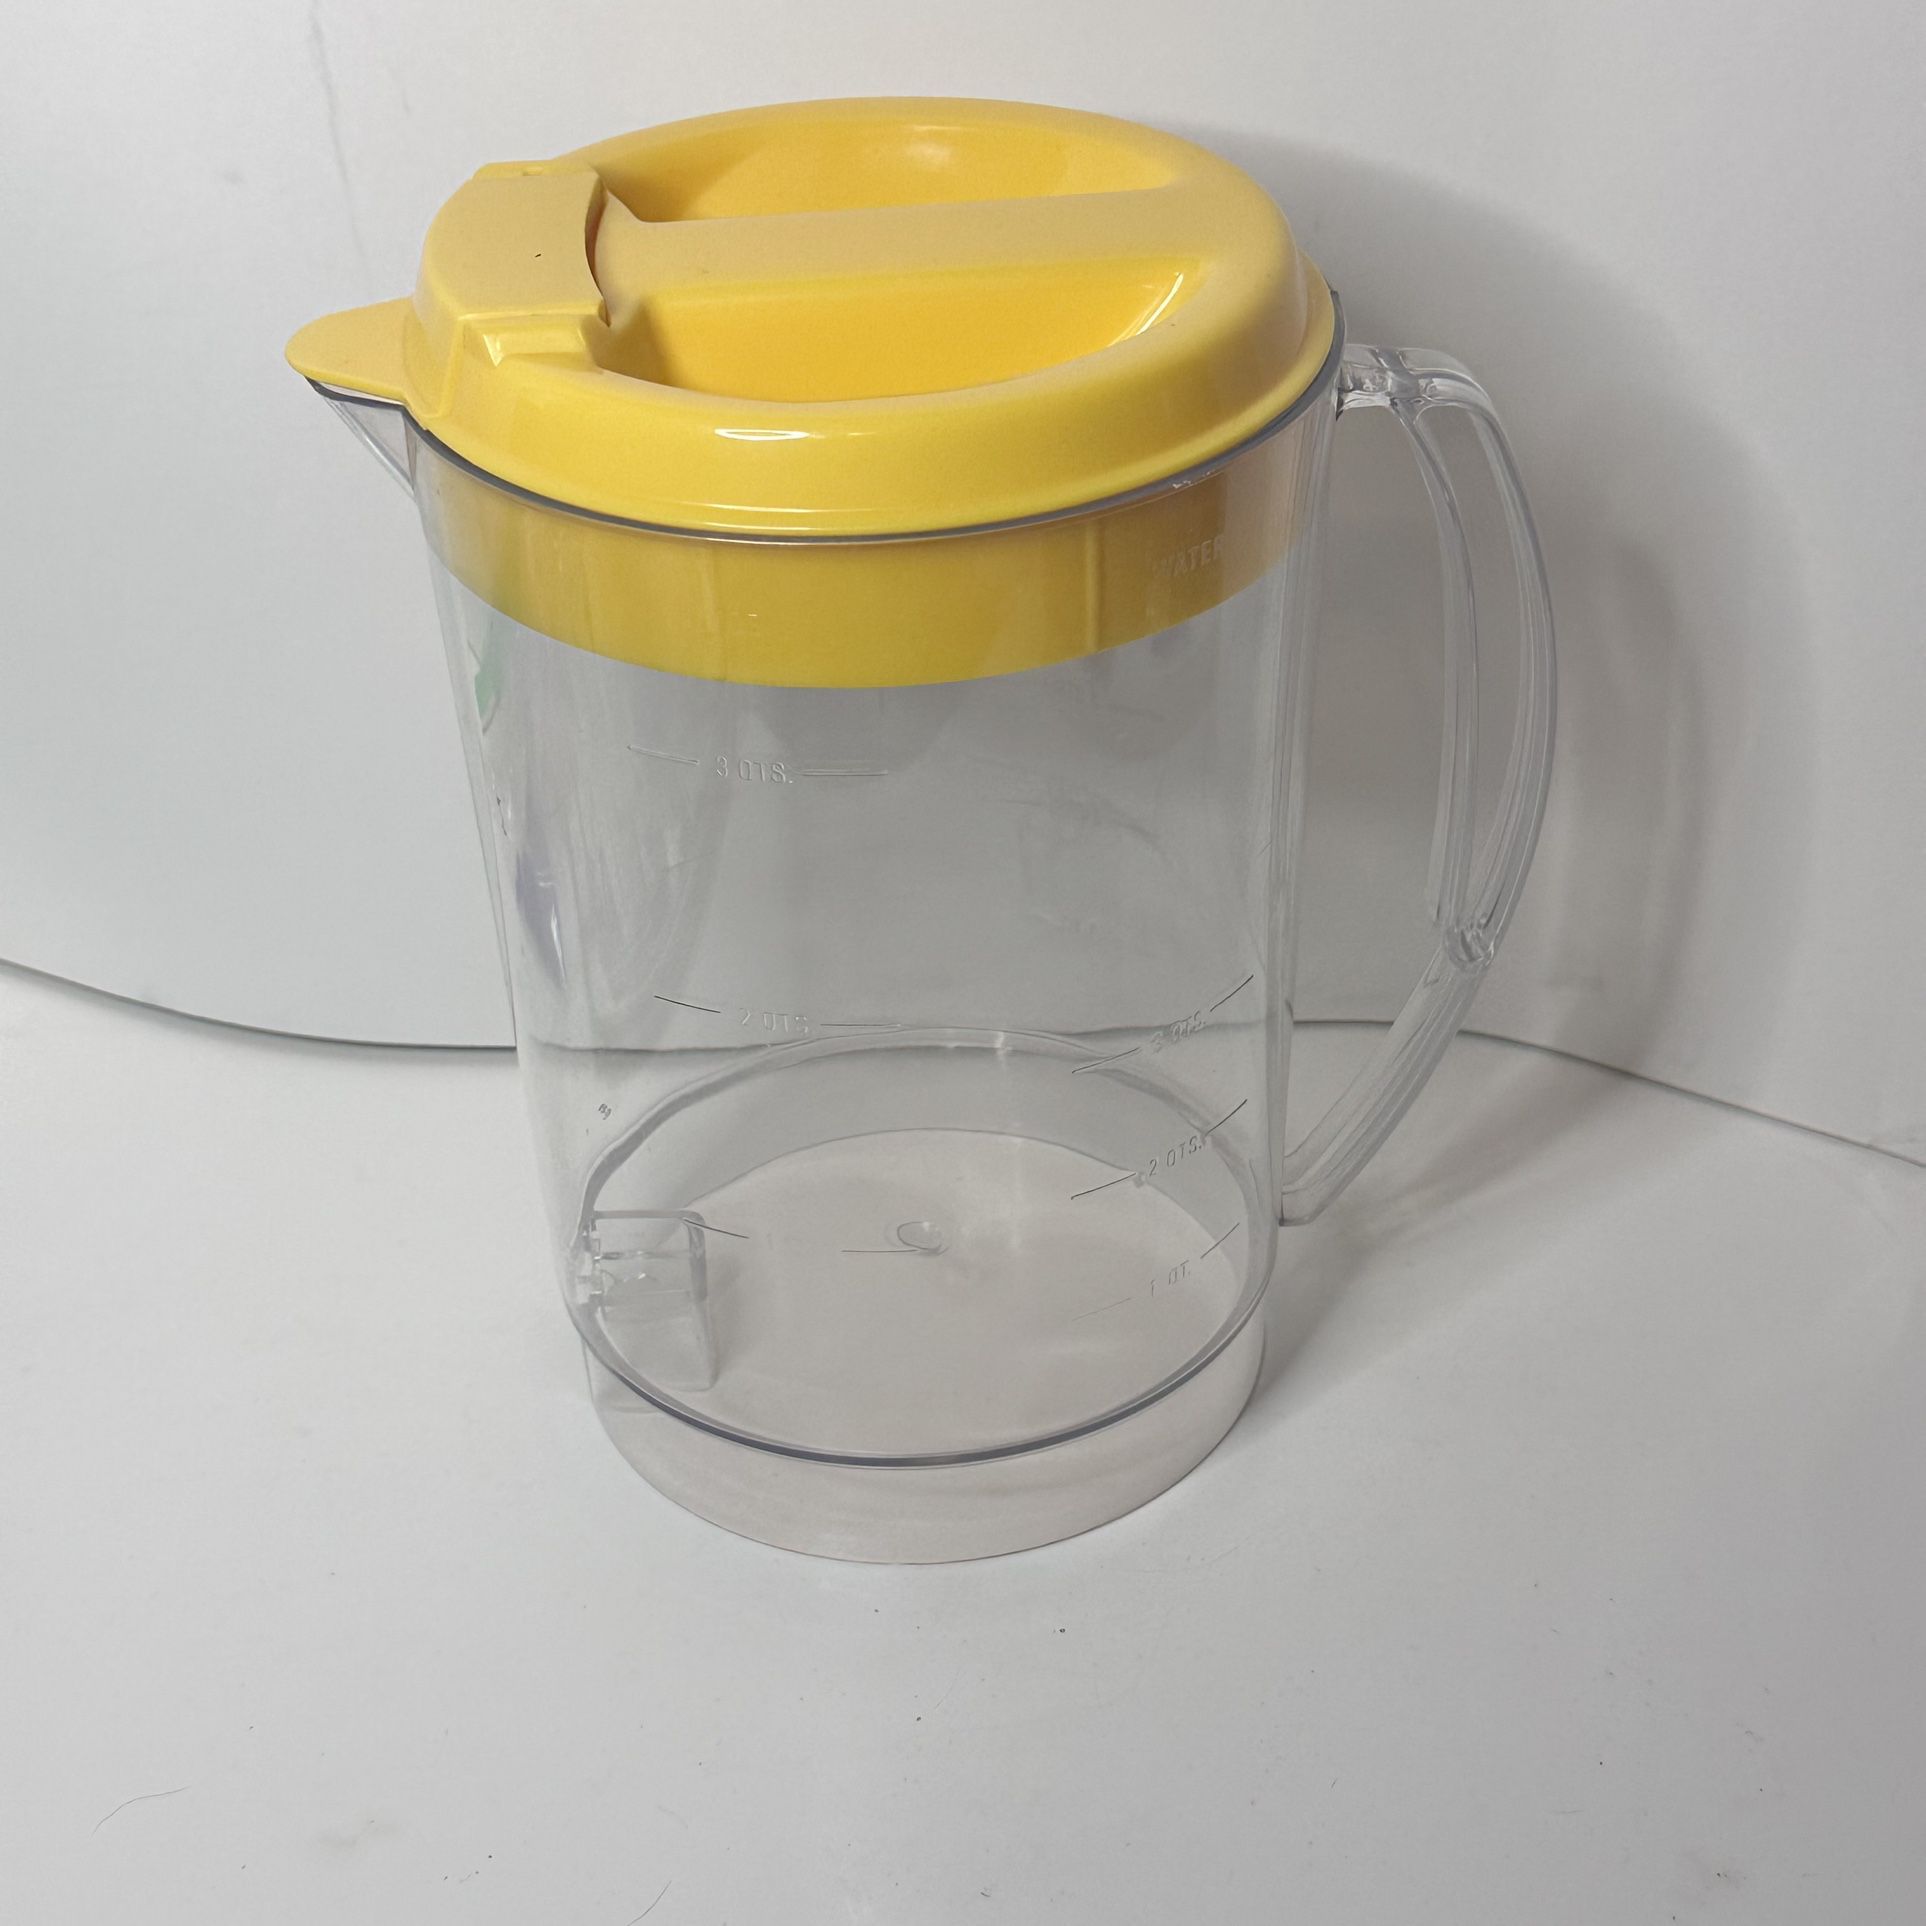 MR COFFEE ICED Tea Maker 3 Qt Replacement Pitcher Lime Green Lid For TM46P  TM30P $24.99 - PicClick